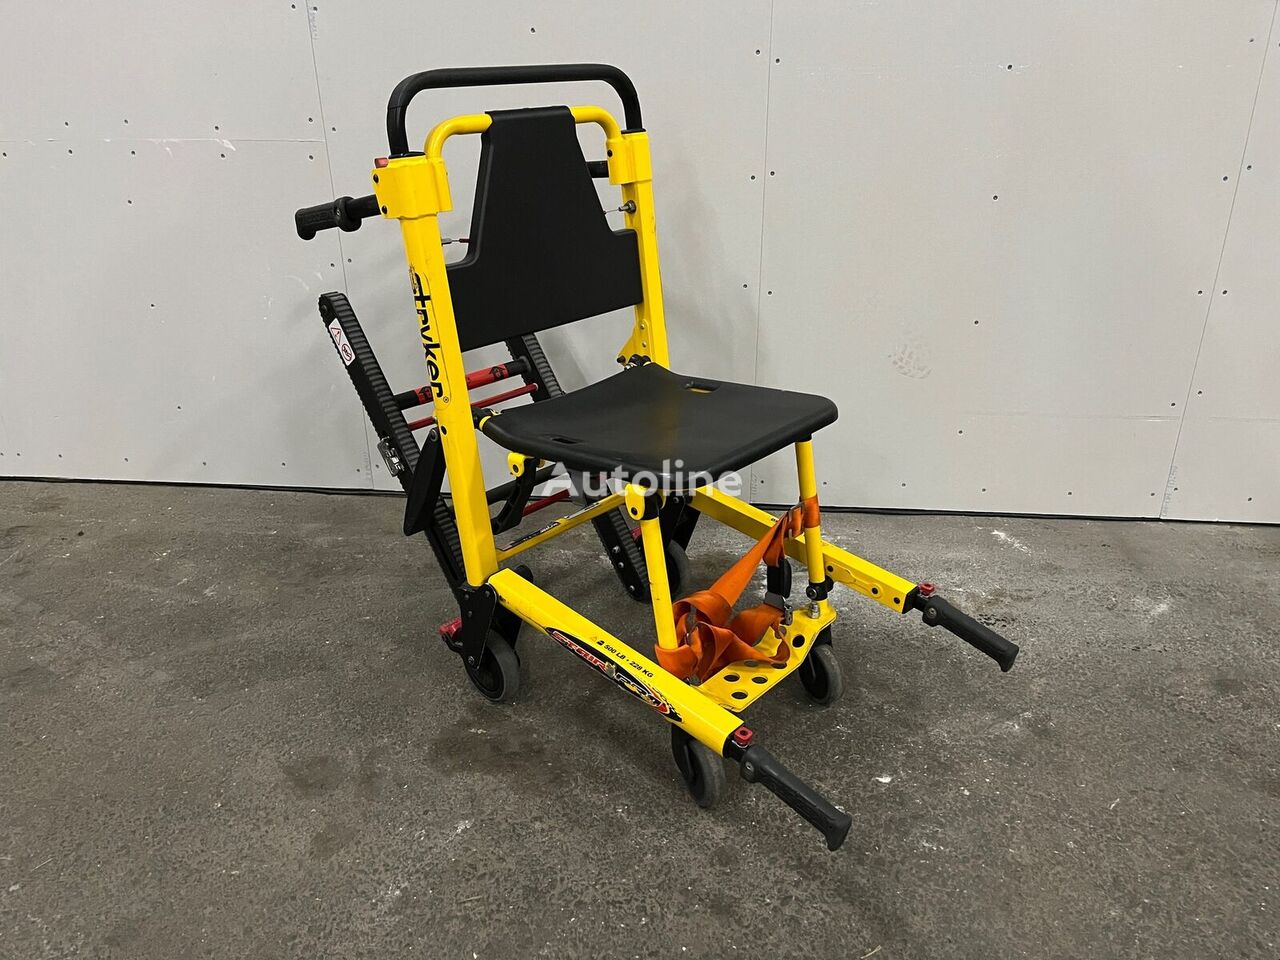 Carry chair - Stryker Prostair 6252 ambulance